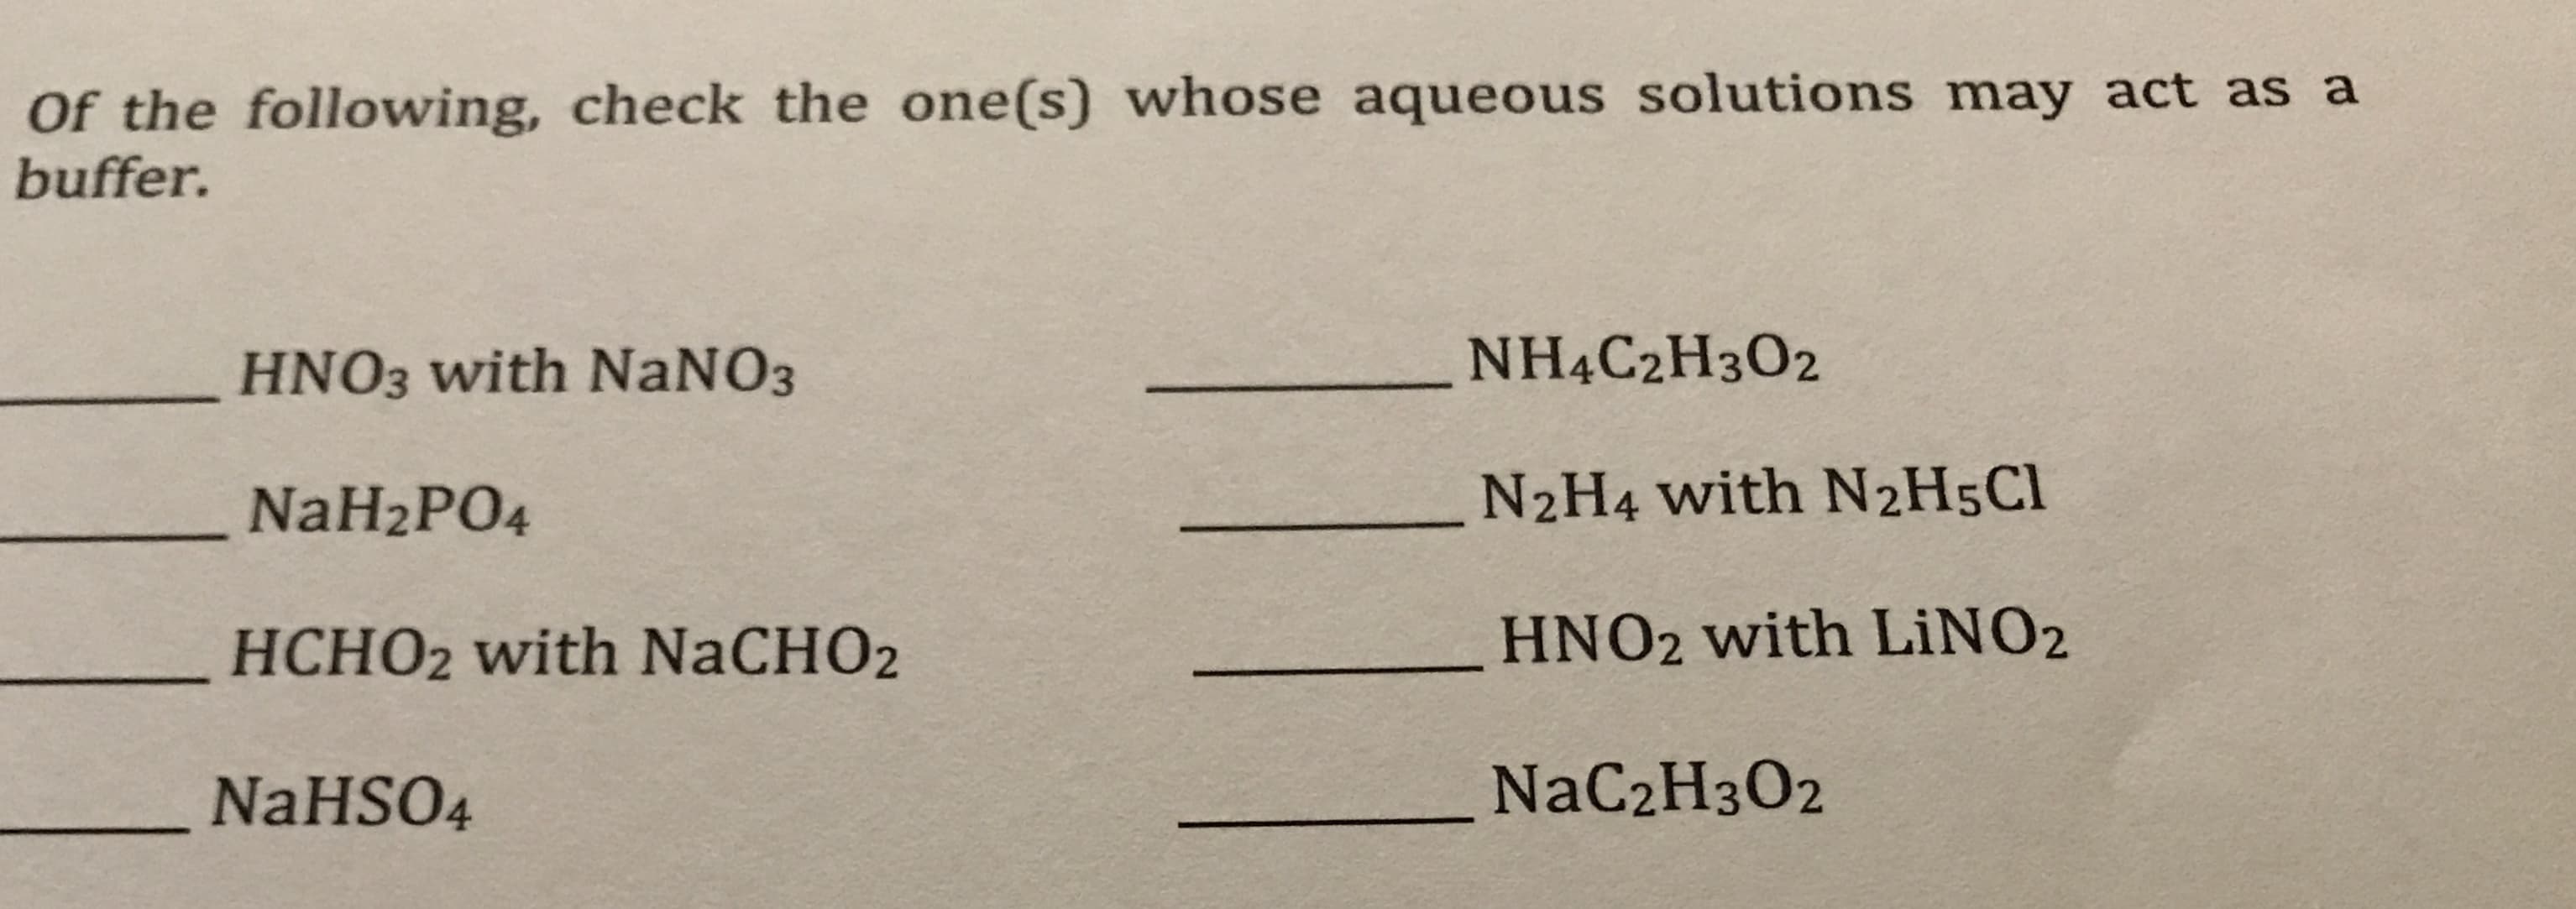 Of the following, check the one(s) whose aqueous solutions may act as a
buffer.
NH4C2H3O2
HNO3 with NANO3
N2H4 with N2H5C1
NaH2PO4
HNO2 with LİNO2
HCHO2 with NaCHO2
NaC2H3O2
NaHSO4
